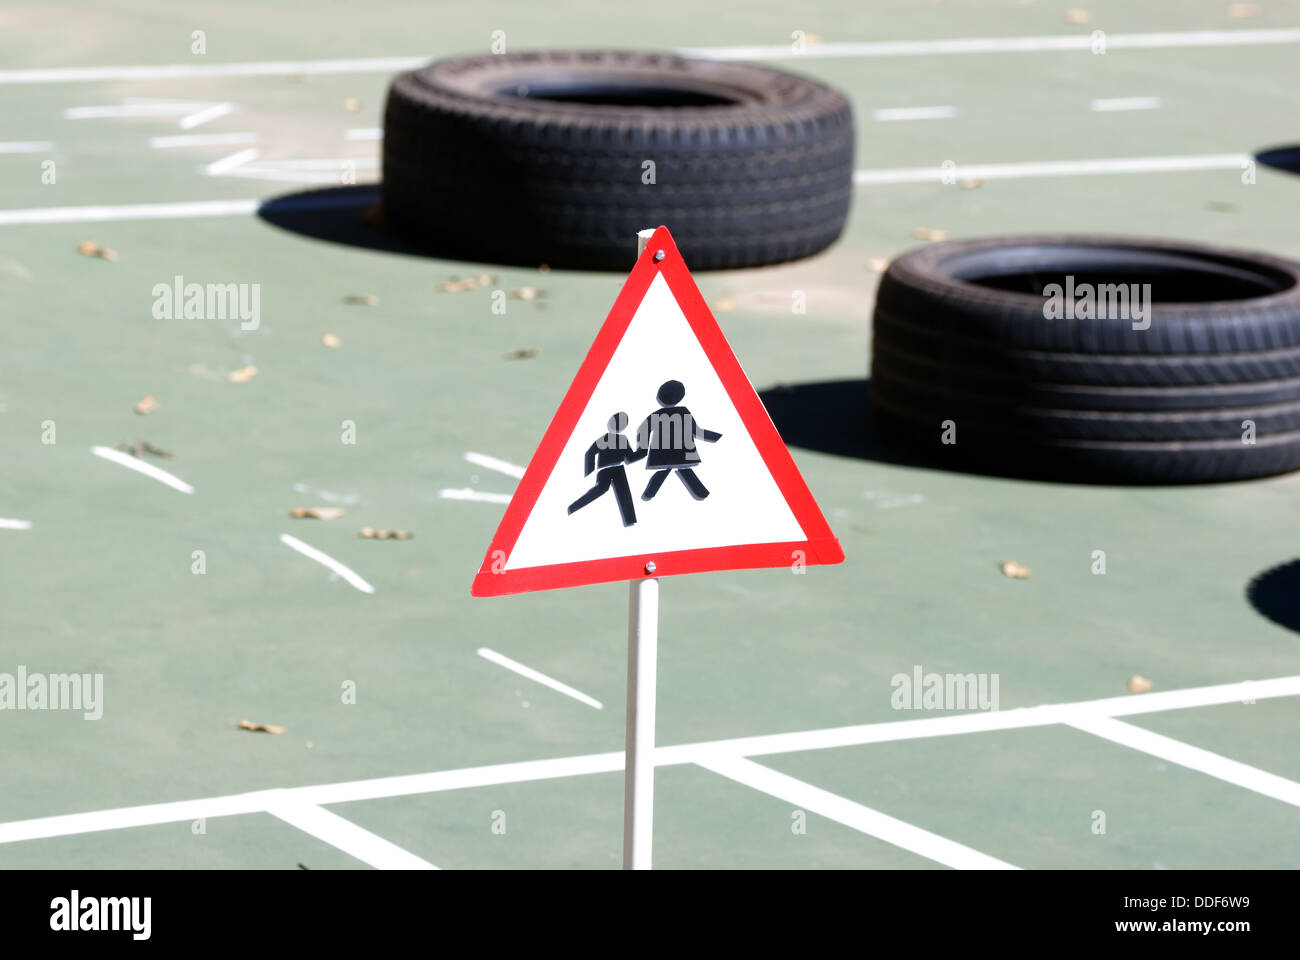 Children's playground with road signs. Stock Photo